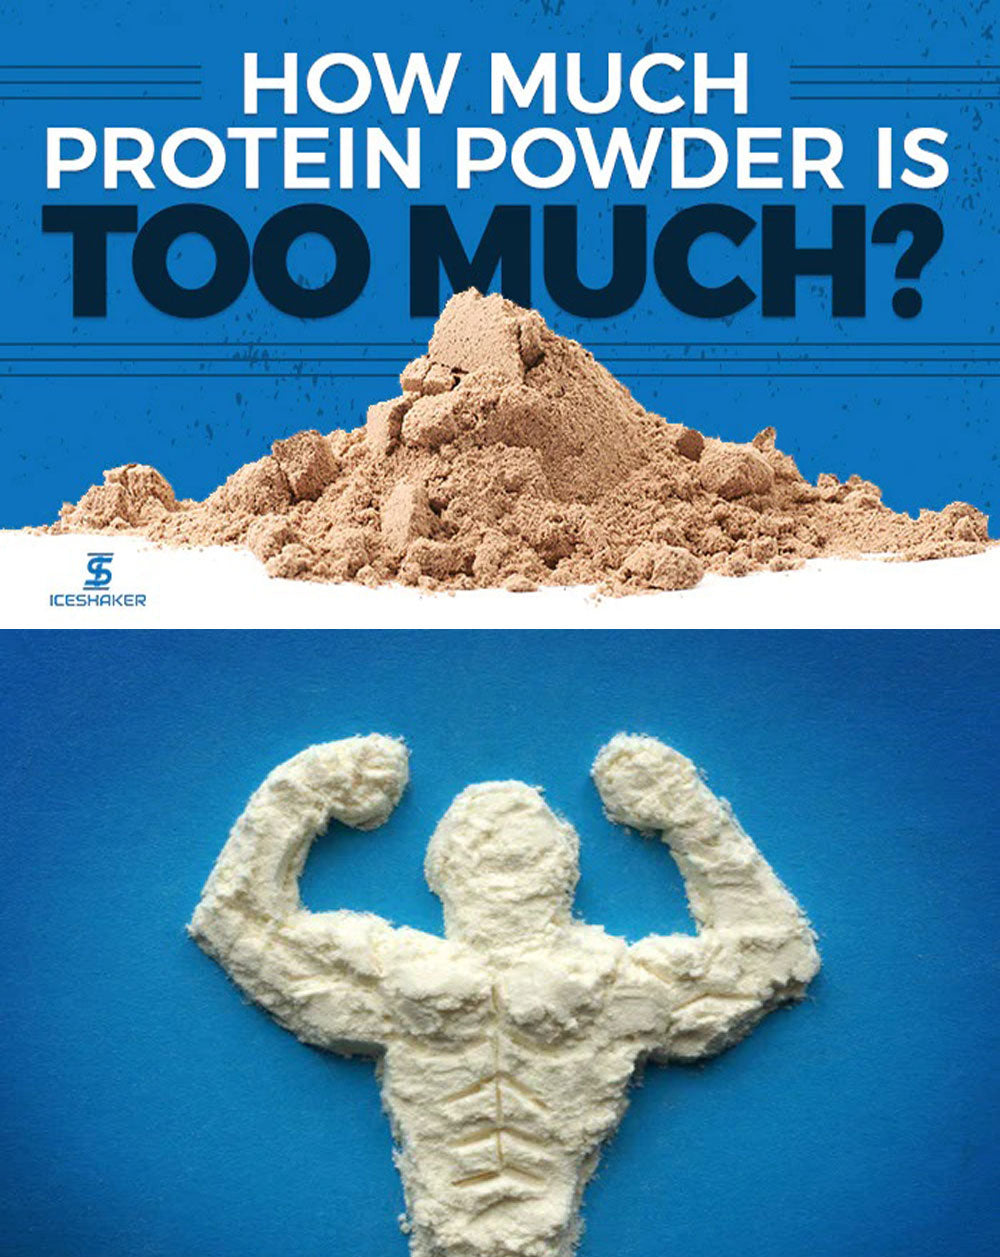 How Much Protein Powder is Too Much?